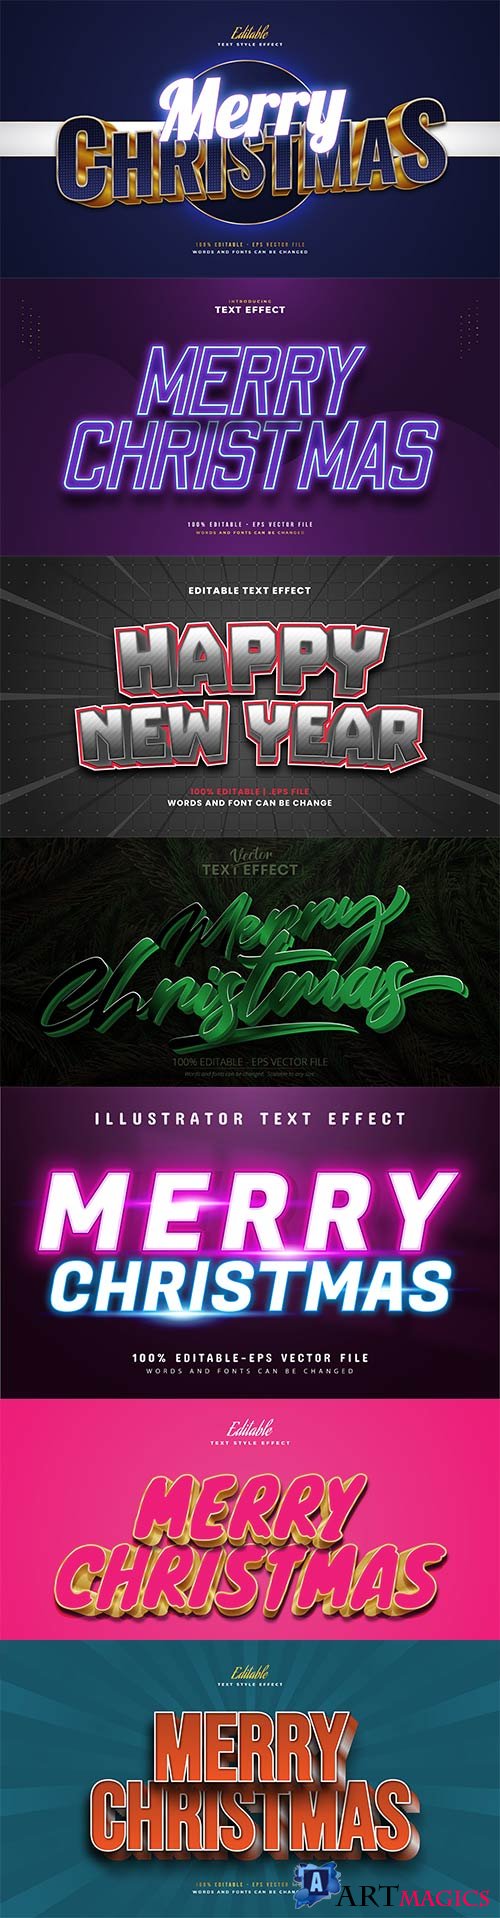 Merry christmas and happy new year 2022 editable vector text effects vol 29